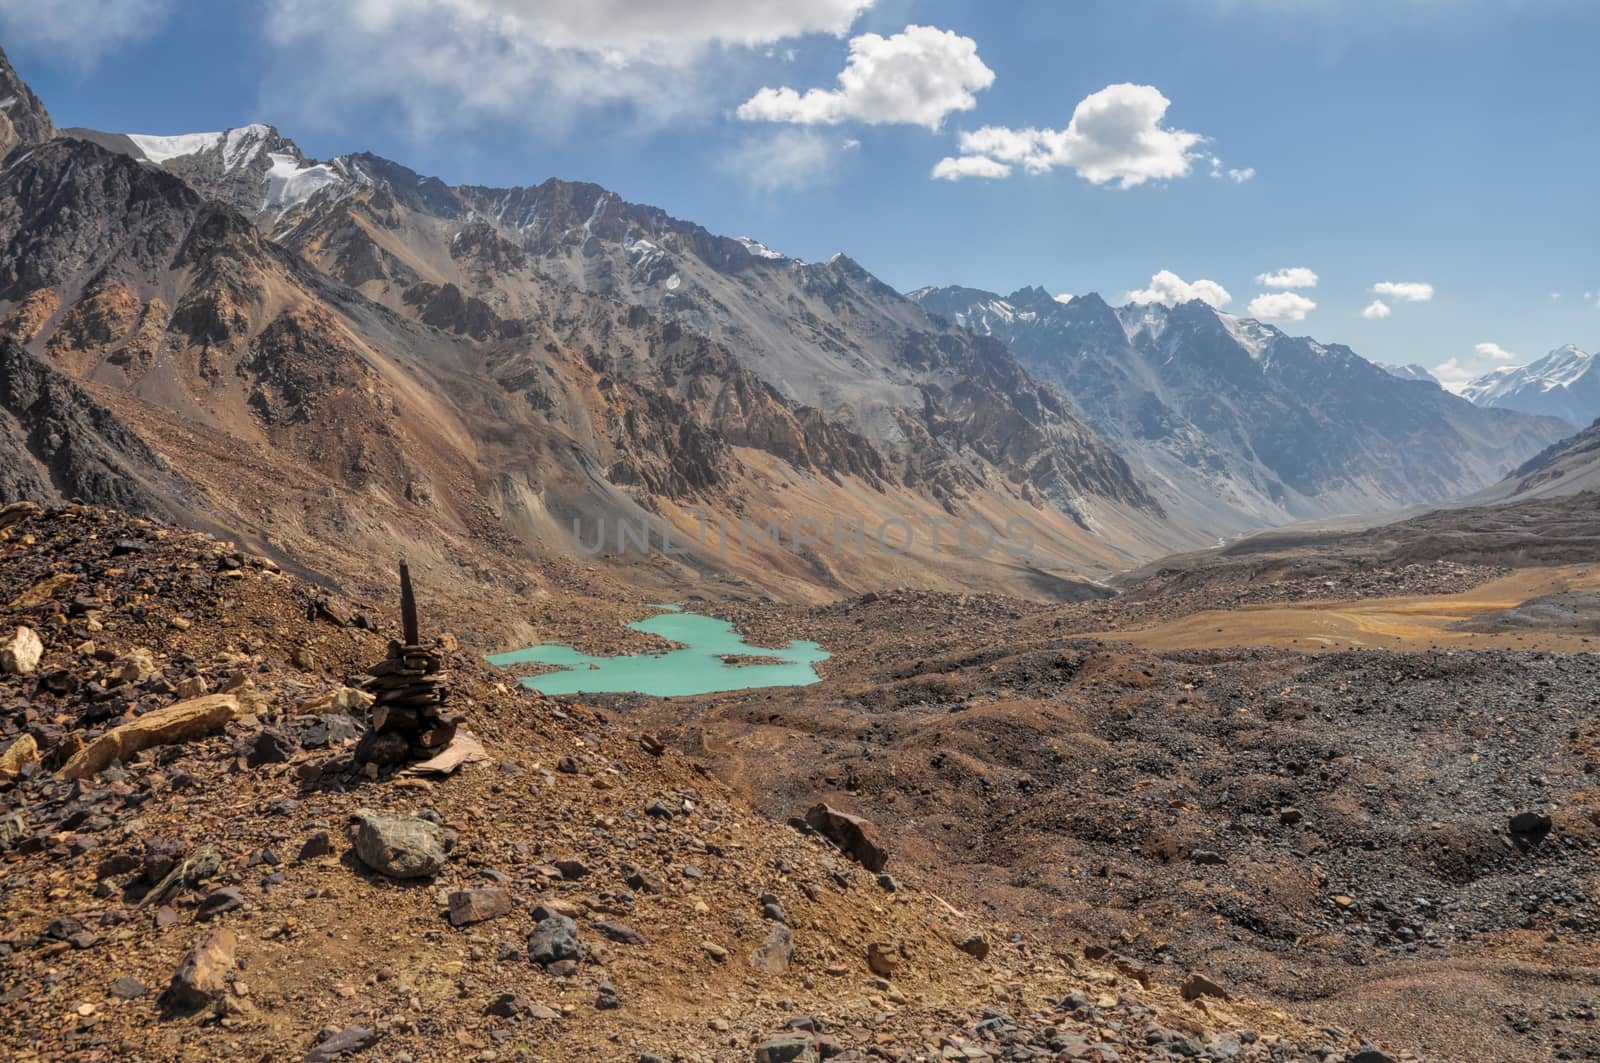 Scenic rocky valley in Pamir mountains in Tajikistan